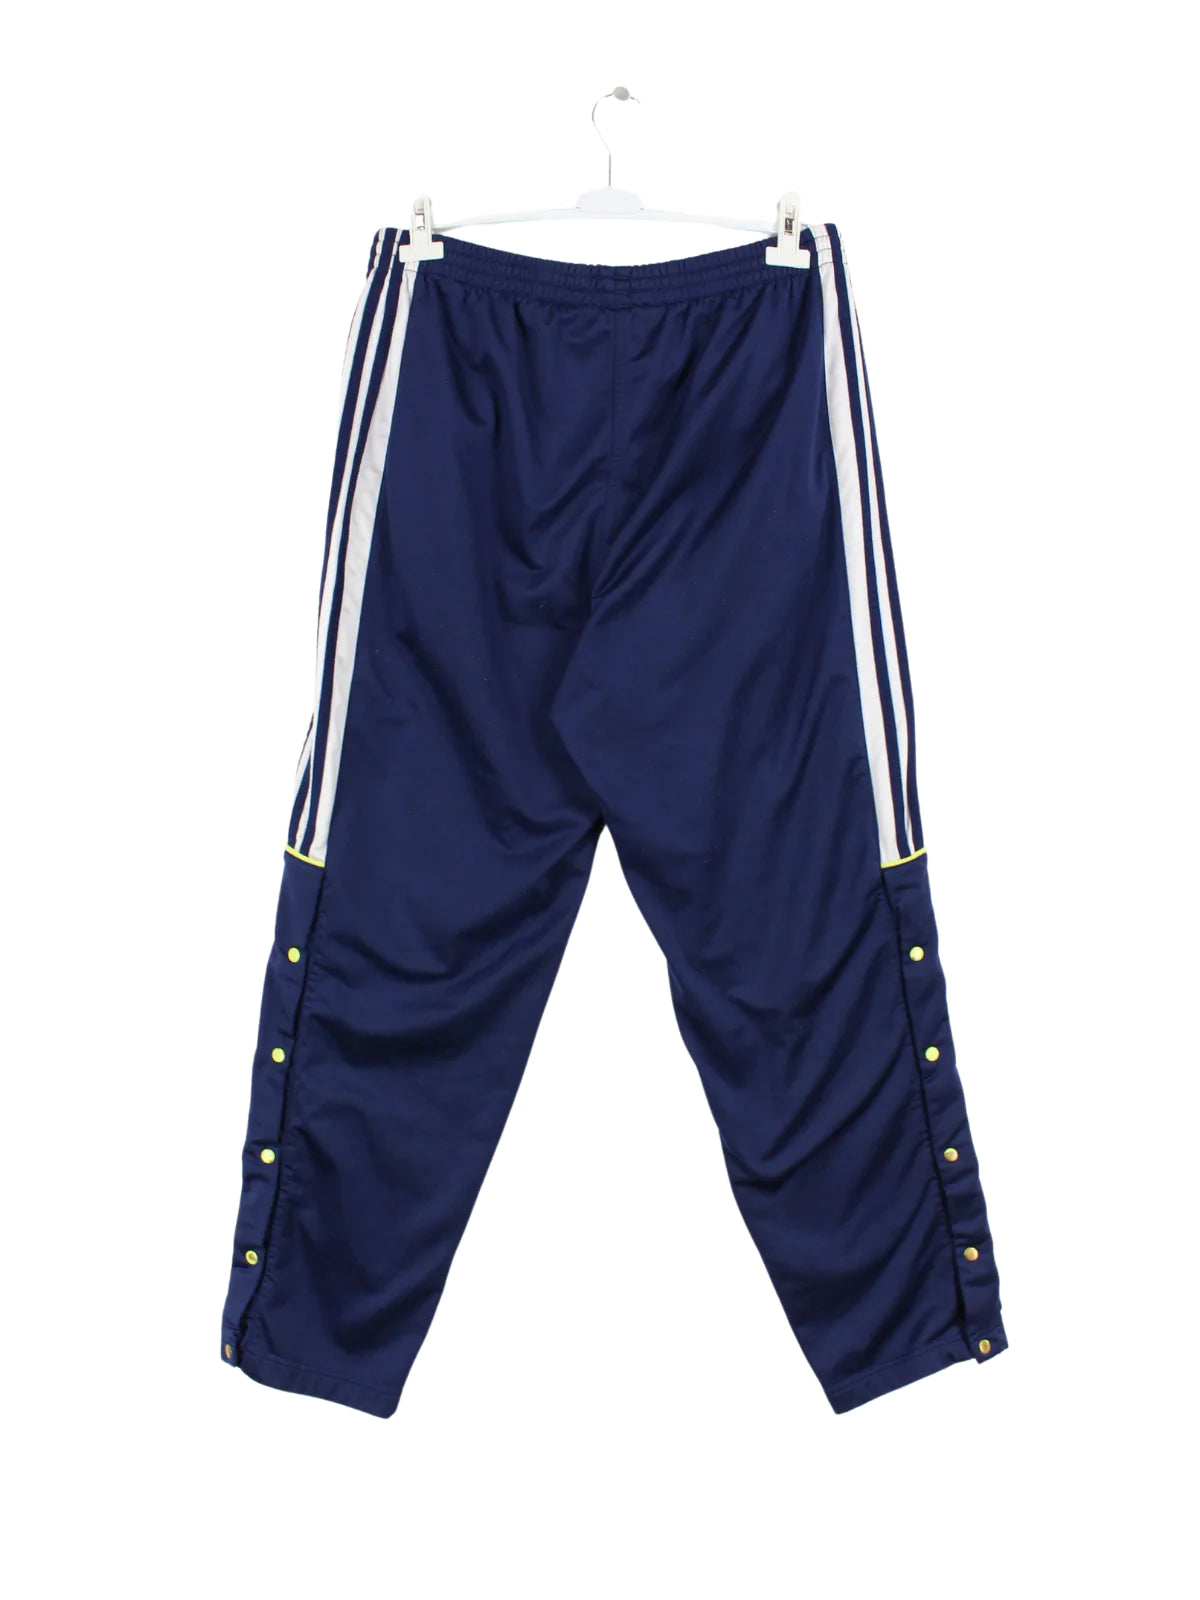 Affordable adidas button pants For Sale  Activewear  Carousell Malaysia